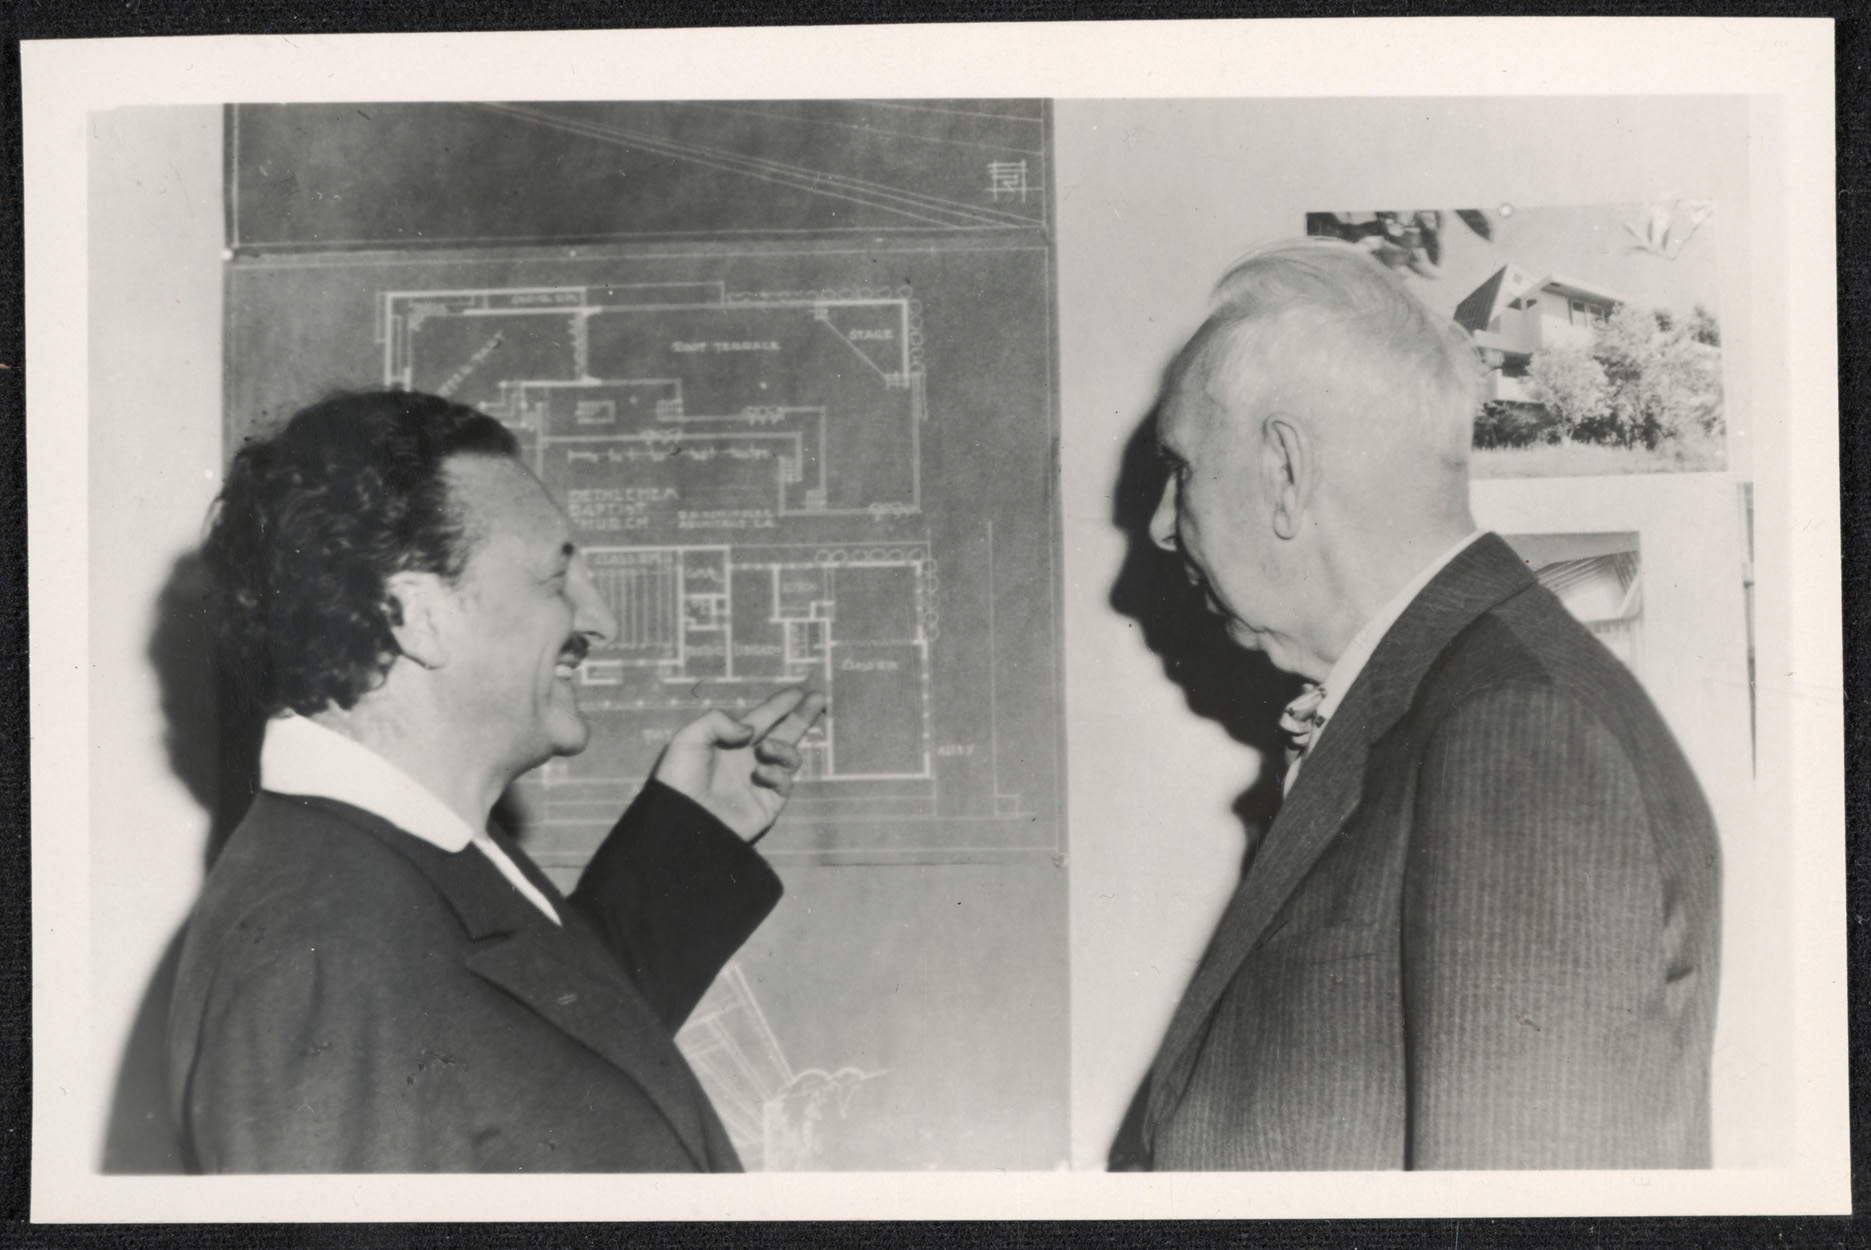 R. M. Schindler and Theodore Dreiser looking at a blueprint of the Bethlehem Baptist Church, 1945, photo by Berkeley Greene Tobey. Esther McCoy Papers, Archives of American Art, Smithsonian Institution.